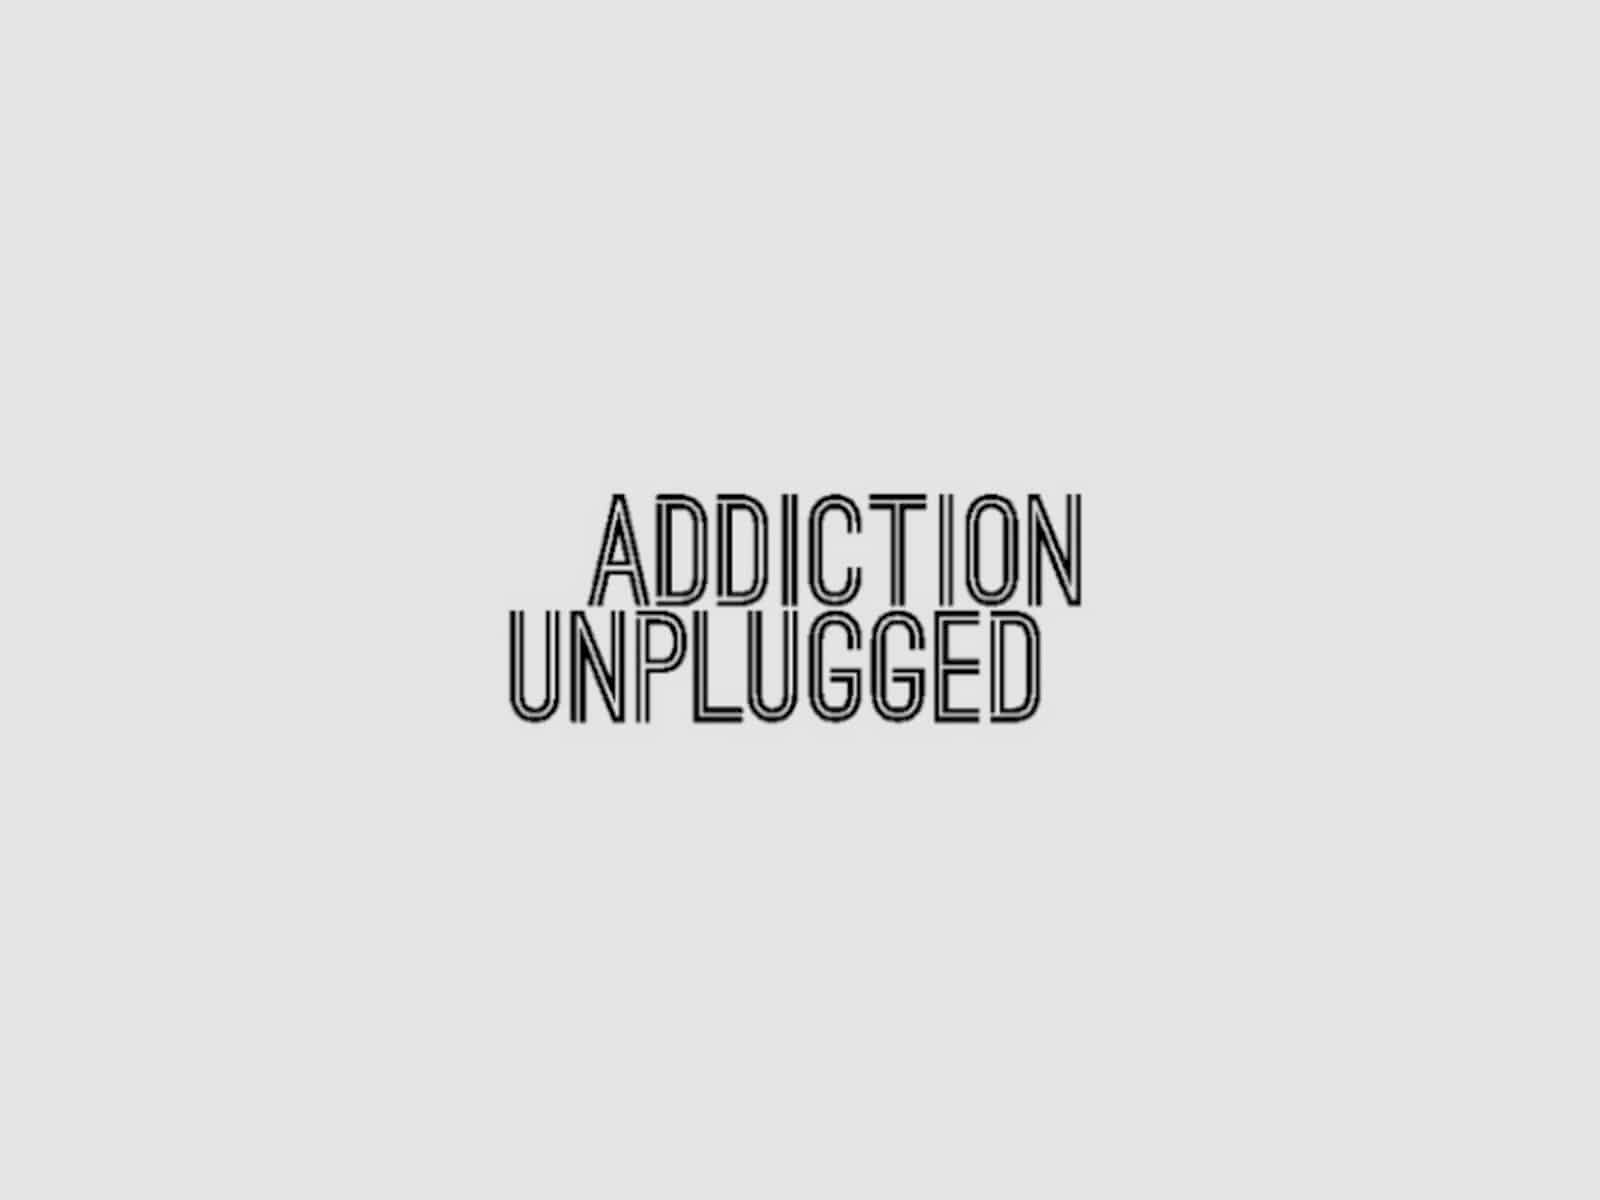 FTM Partner Recovery Unplugged to Be Featured on A&E’s Addiction Unplugged